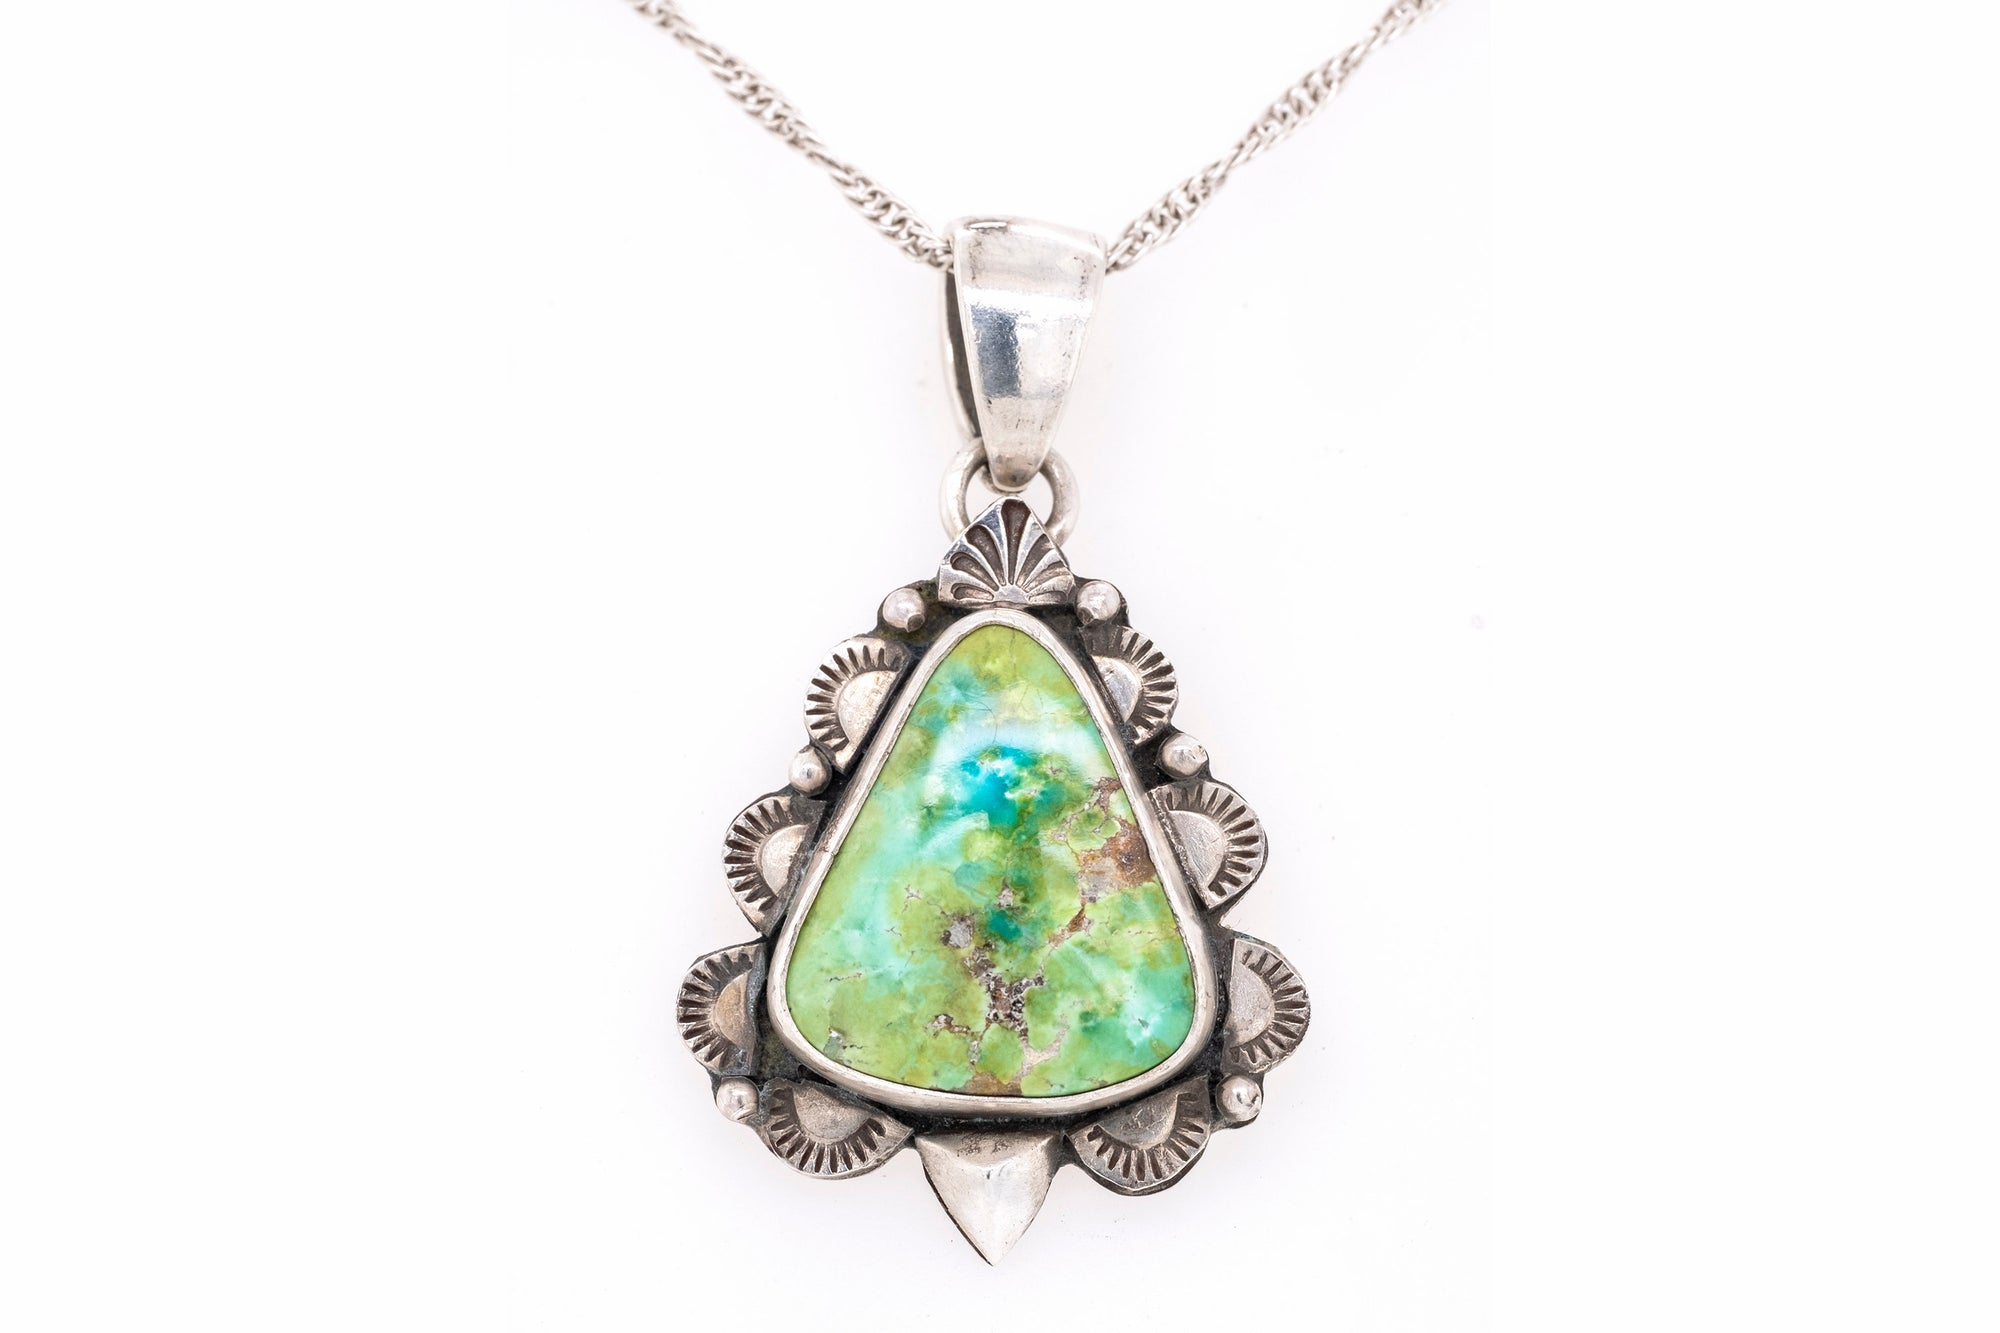 Sonoran Turquoise Stamp-Work Pendant by Gary Glandon